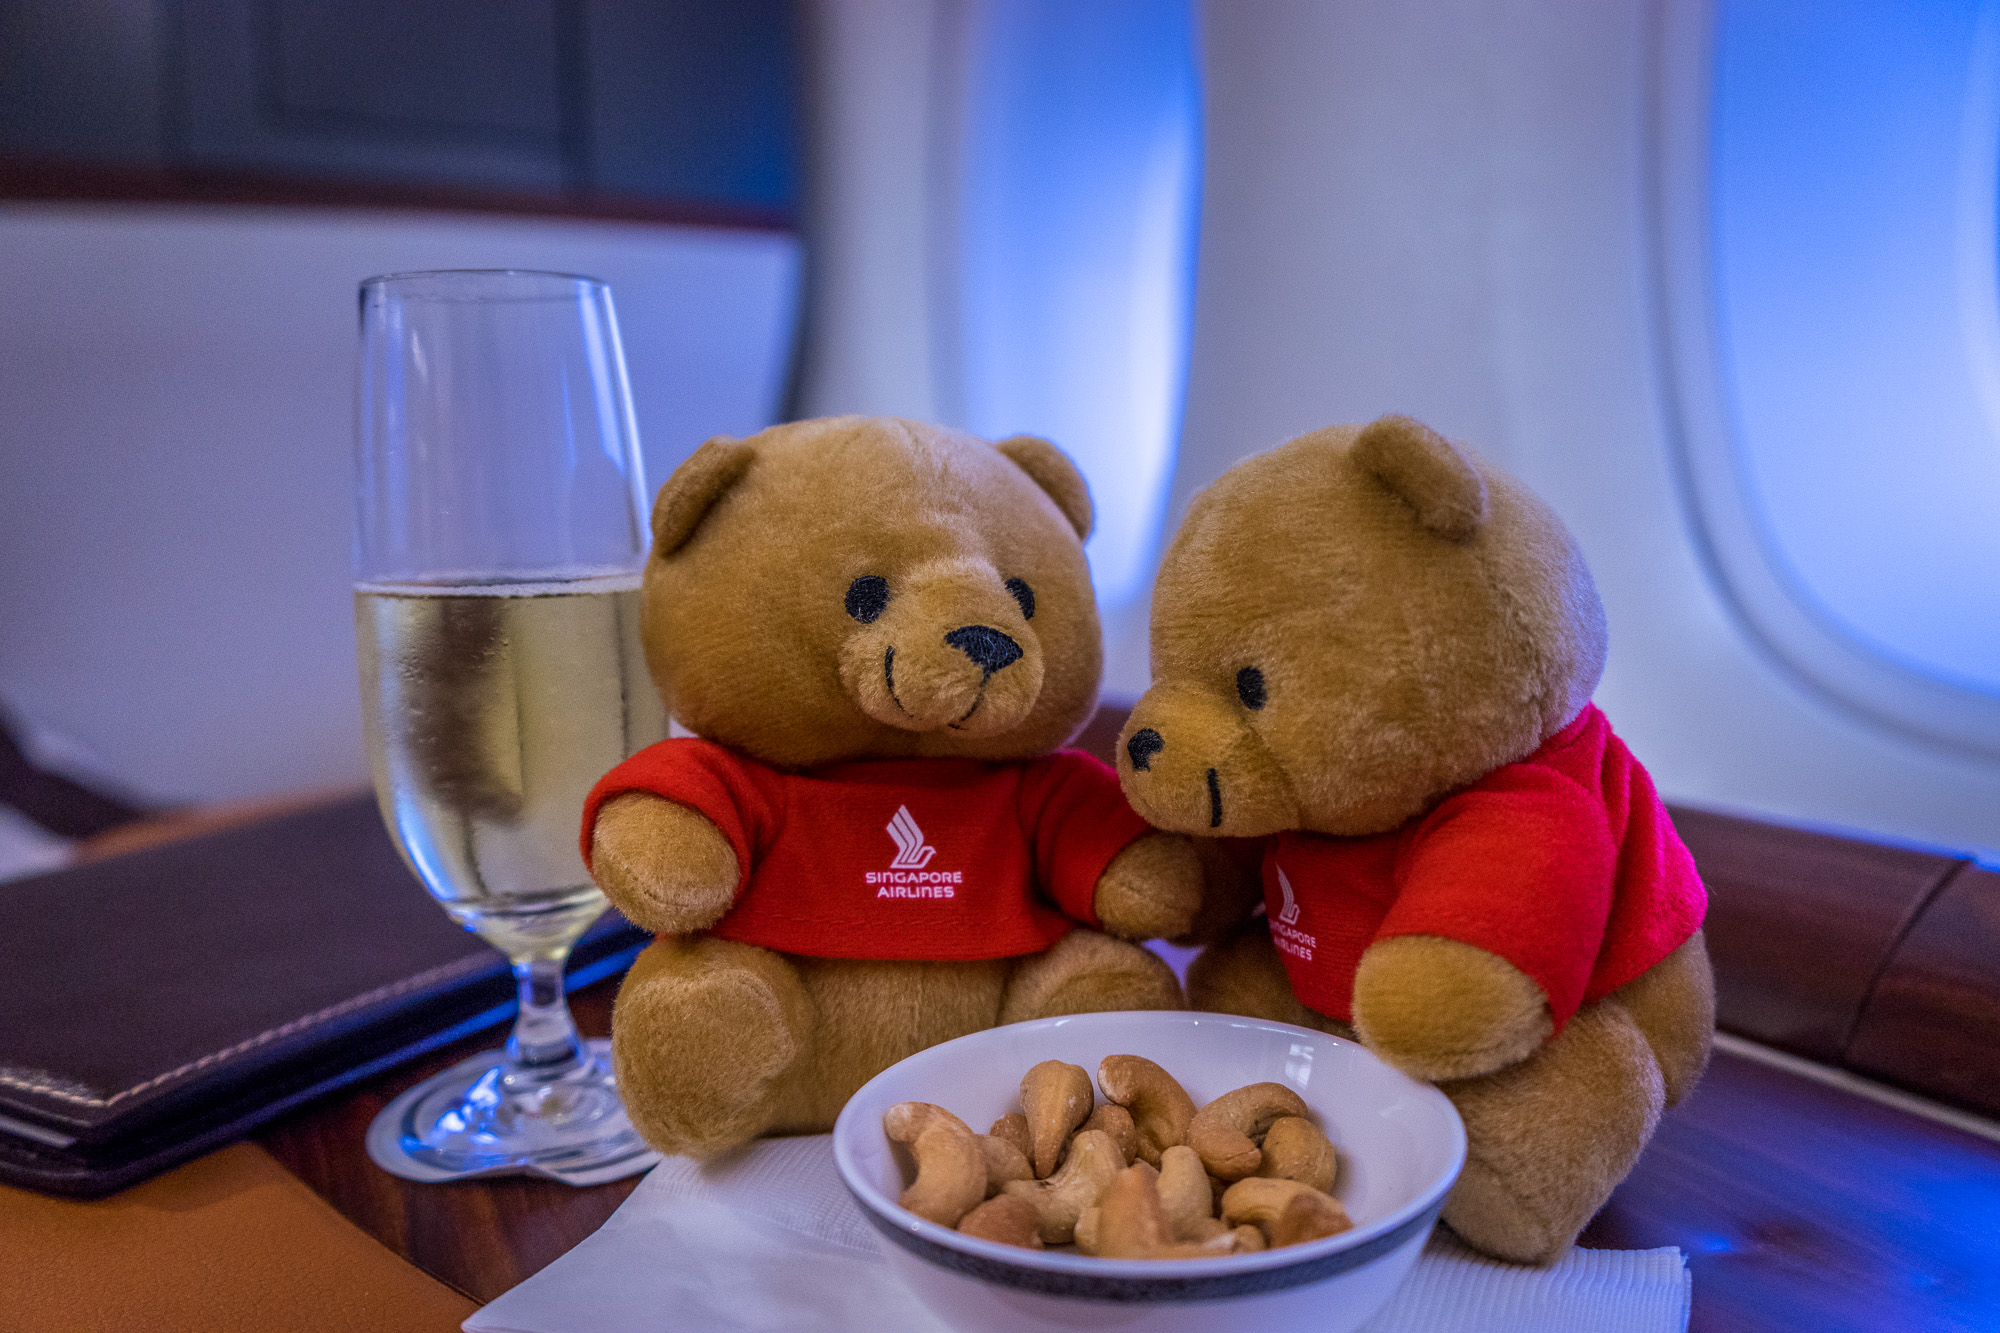 Two bears, champagne, and cashews.  The life.